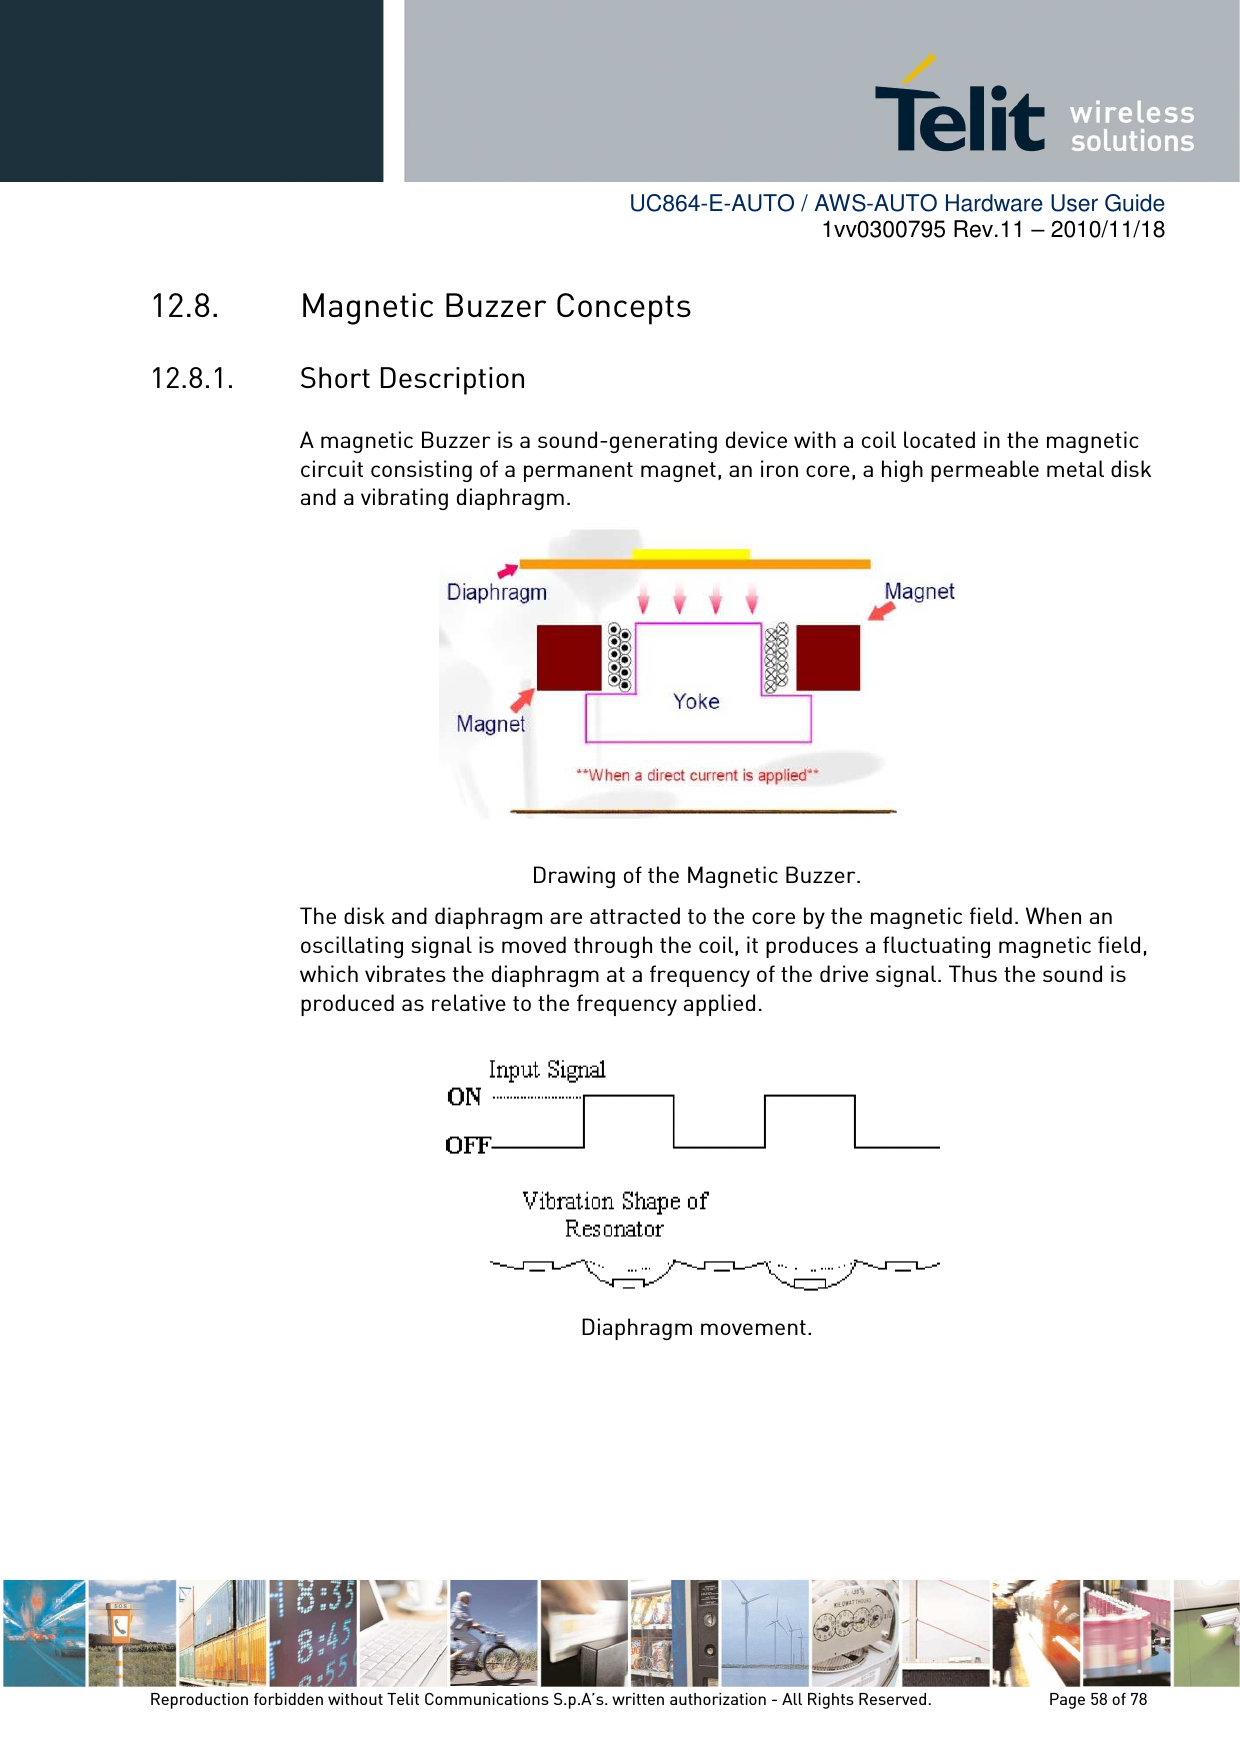        UC864-E-AUTO / AWS-AUTO Hardware User Guide 1vv0300795 Rev.11 – 2010/11/18     Reproduction forbidden without Telit Communications S.p.A’s. written authorization - All Rights Reserved.    Page 58 of 78  12.8. Magnetic Buzzer Concepts 12.8.1. Short Description A magnetic Buzzer is a sound-generating device with a coil located in the magnetic circuit consisting of a permanent magnet, an iron core, a high permeable metal disk and a vibrating diaphragm.   Drawing of the Magnetic Buzzer. The disk and diaphragm are attracted to the core by the magnetic field. When an oscillating signal is moved through the coil, it produces a fluctuating magnetic field, which vibrates the diaphragm at a frequency of the drive signal. Thus the sound is produced as relative to the frequency applied.  Diaphragm movement. 